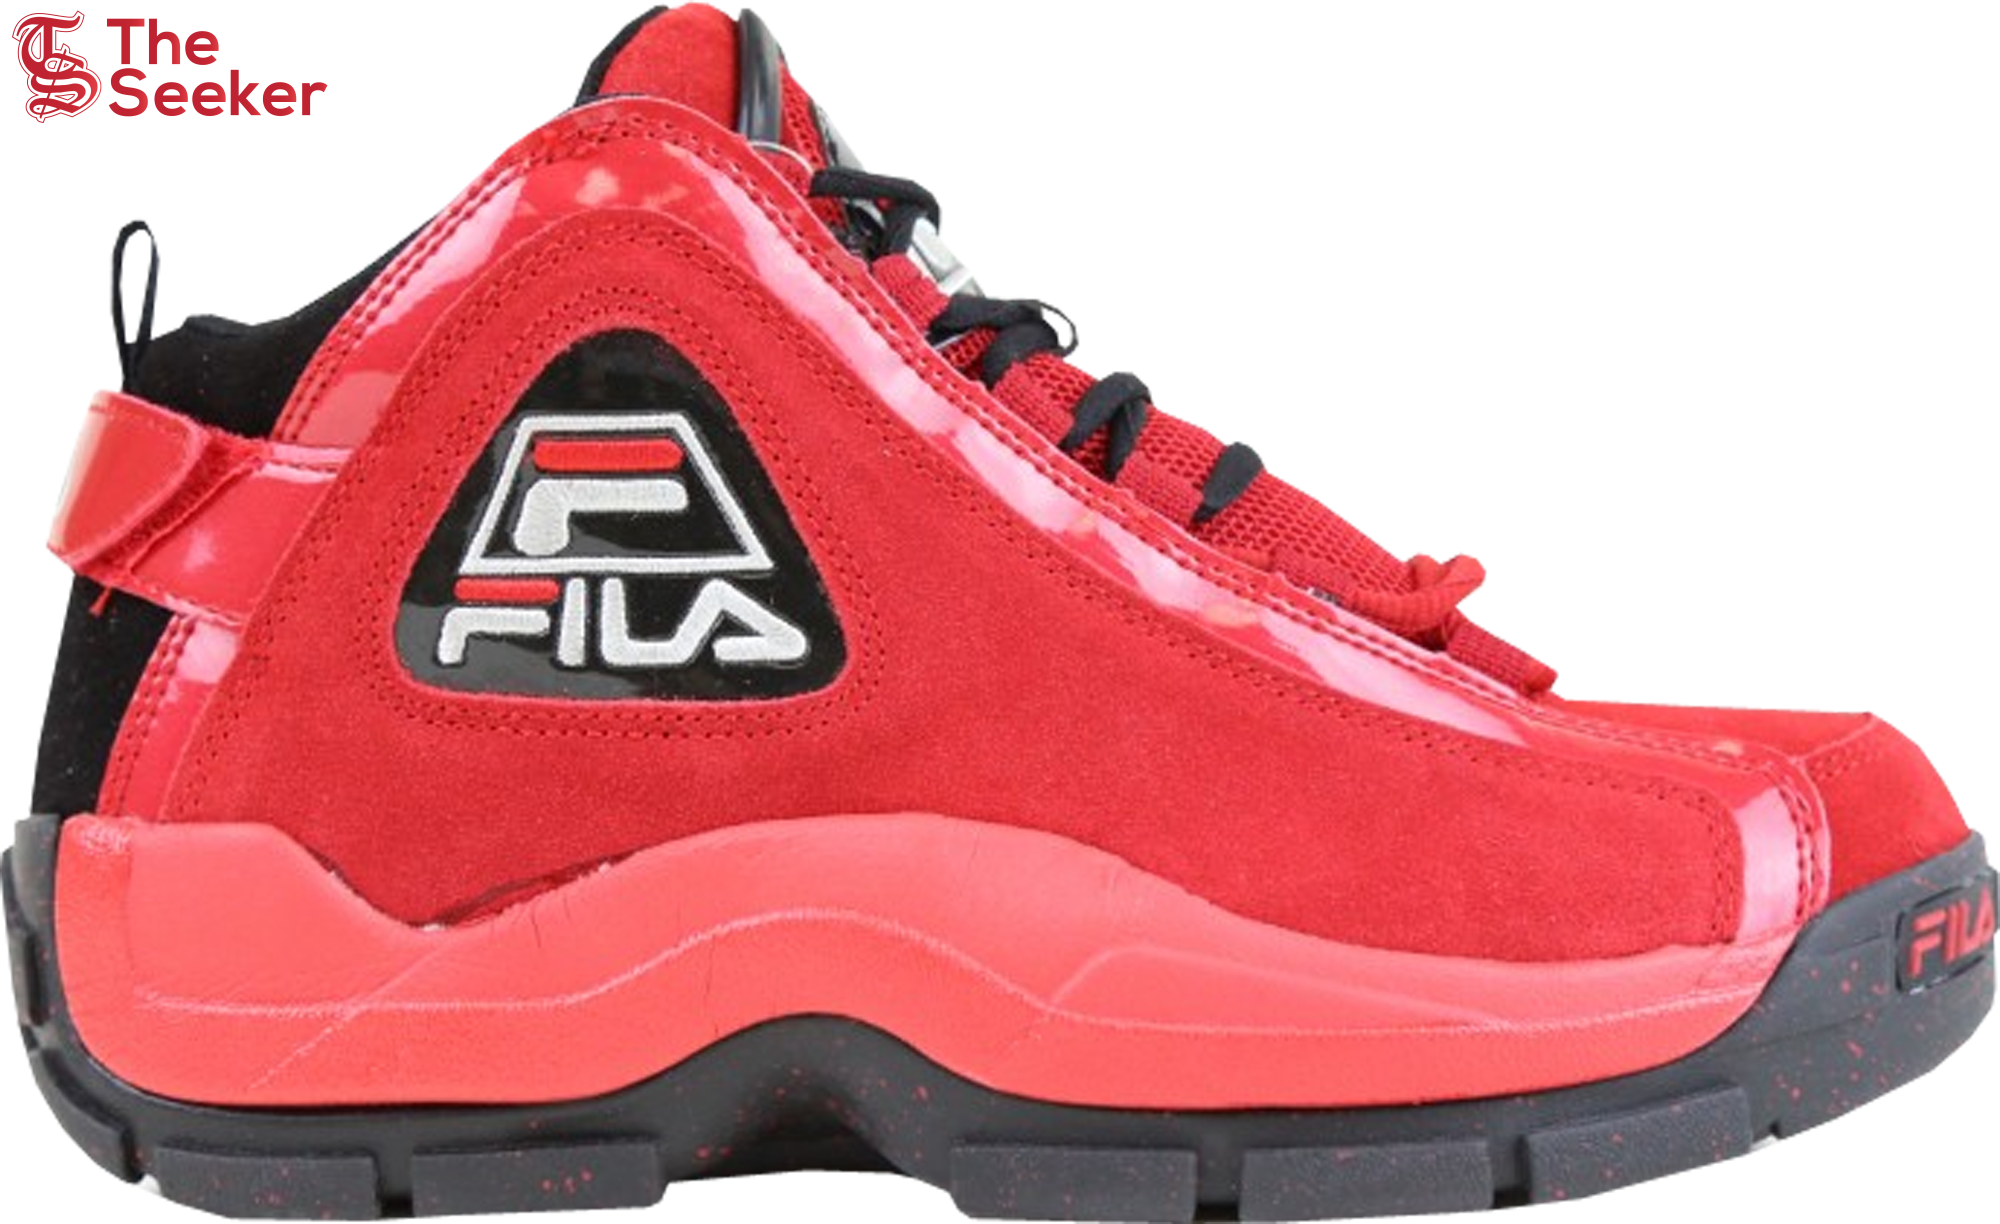 Fila 96 Red Suede